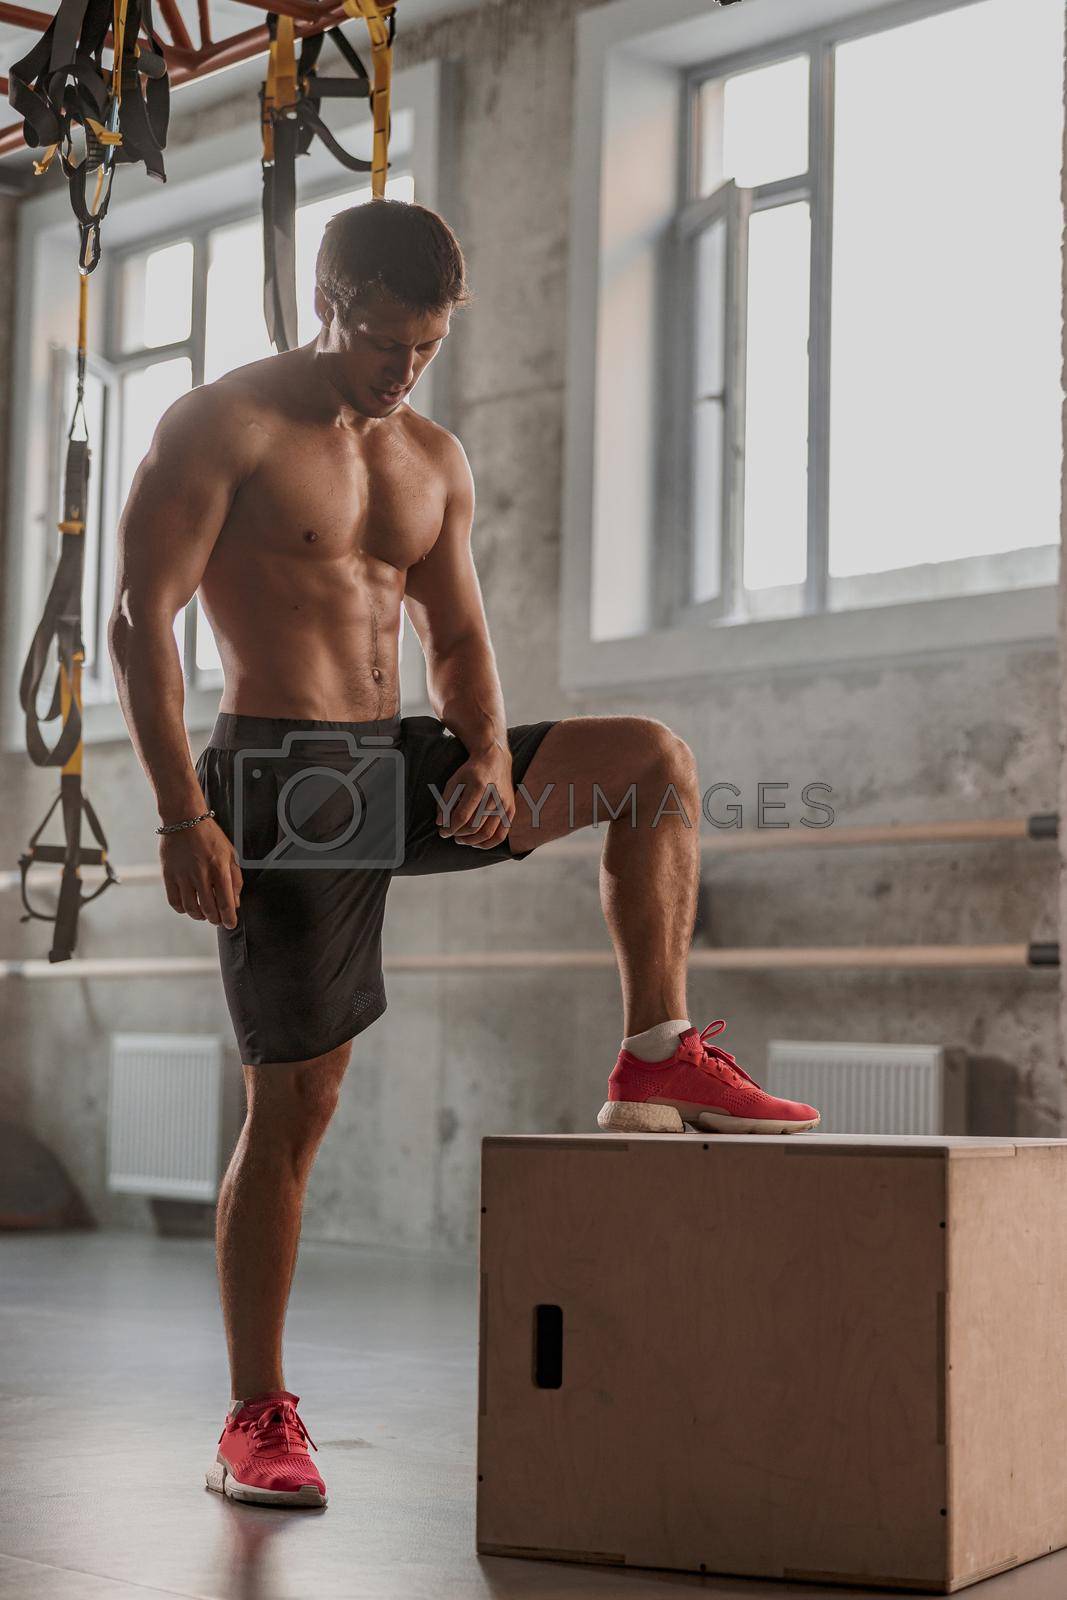 Sporty physically fit man doing step-up exercise on feet box while doing gym training in sports club